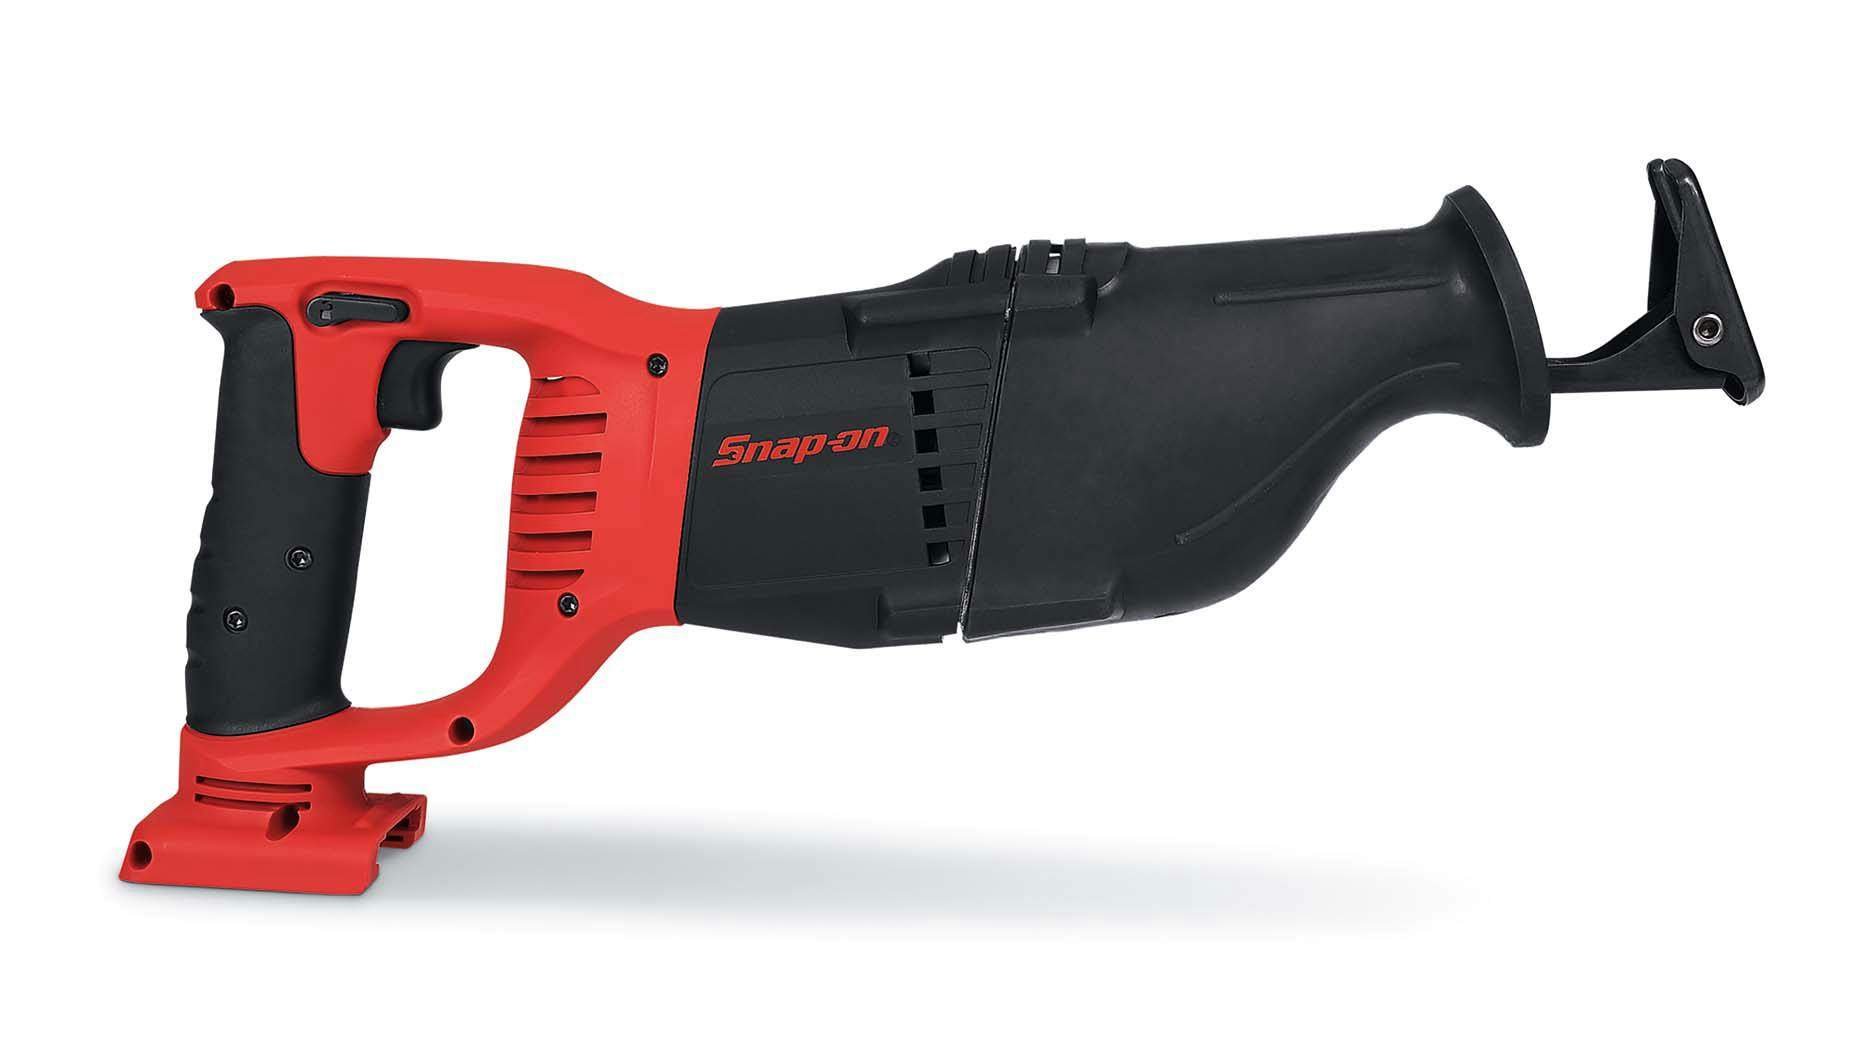 18 V MonsterLithium Cordless Reciprocating Saw (Tool Only) (Red 